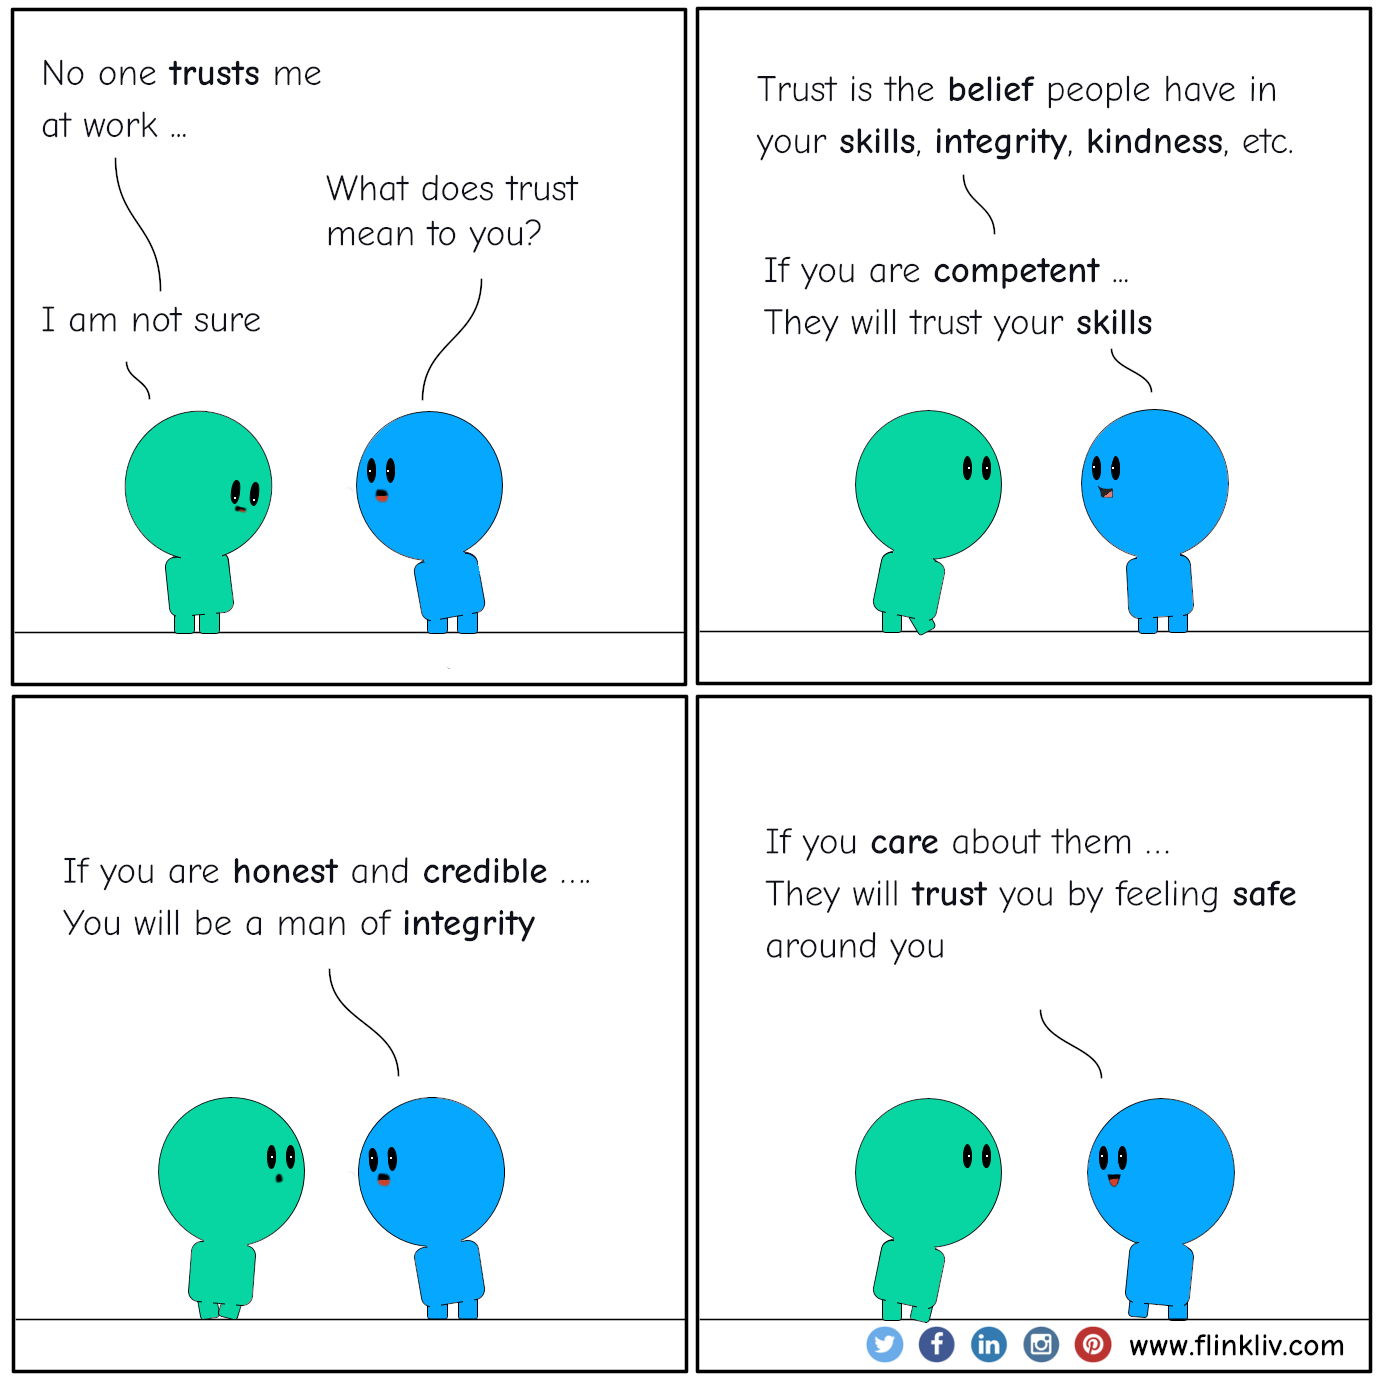 Conversation between A and B about trust. A: No one trusts me at work B: What does trust mean to you? A: I am not sure B: Trust is the belief people have in your skills, integrity, kindness, etc. B: If you are competent; they will trust your skills B: If you are honest and credible, you will be a man of integrity B: If you care about them They will trust you by feeling safe around you By flinkliv.com